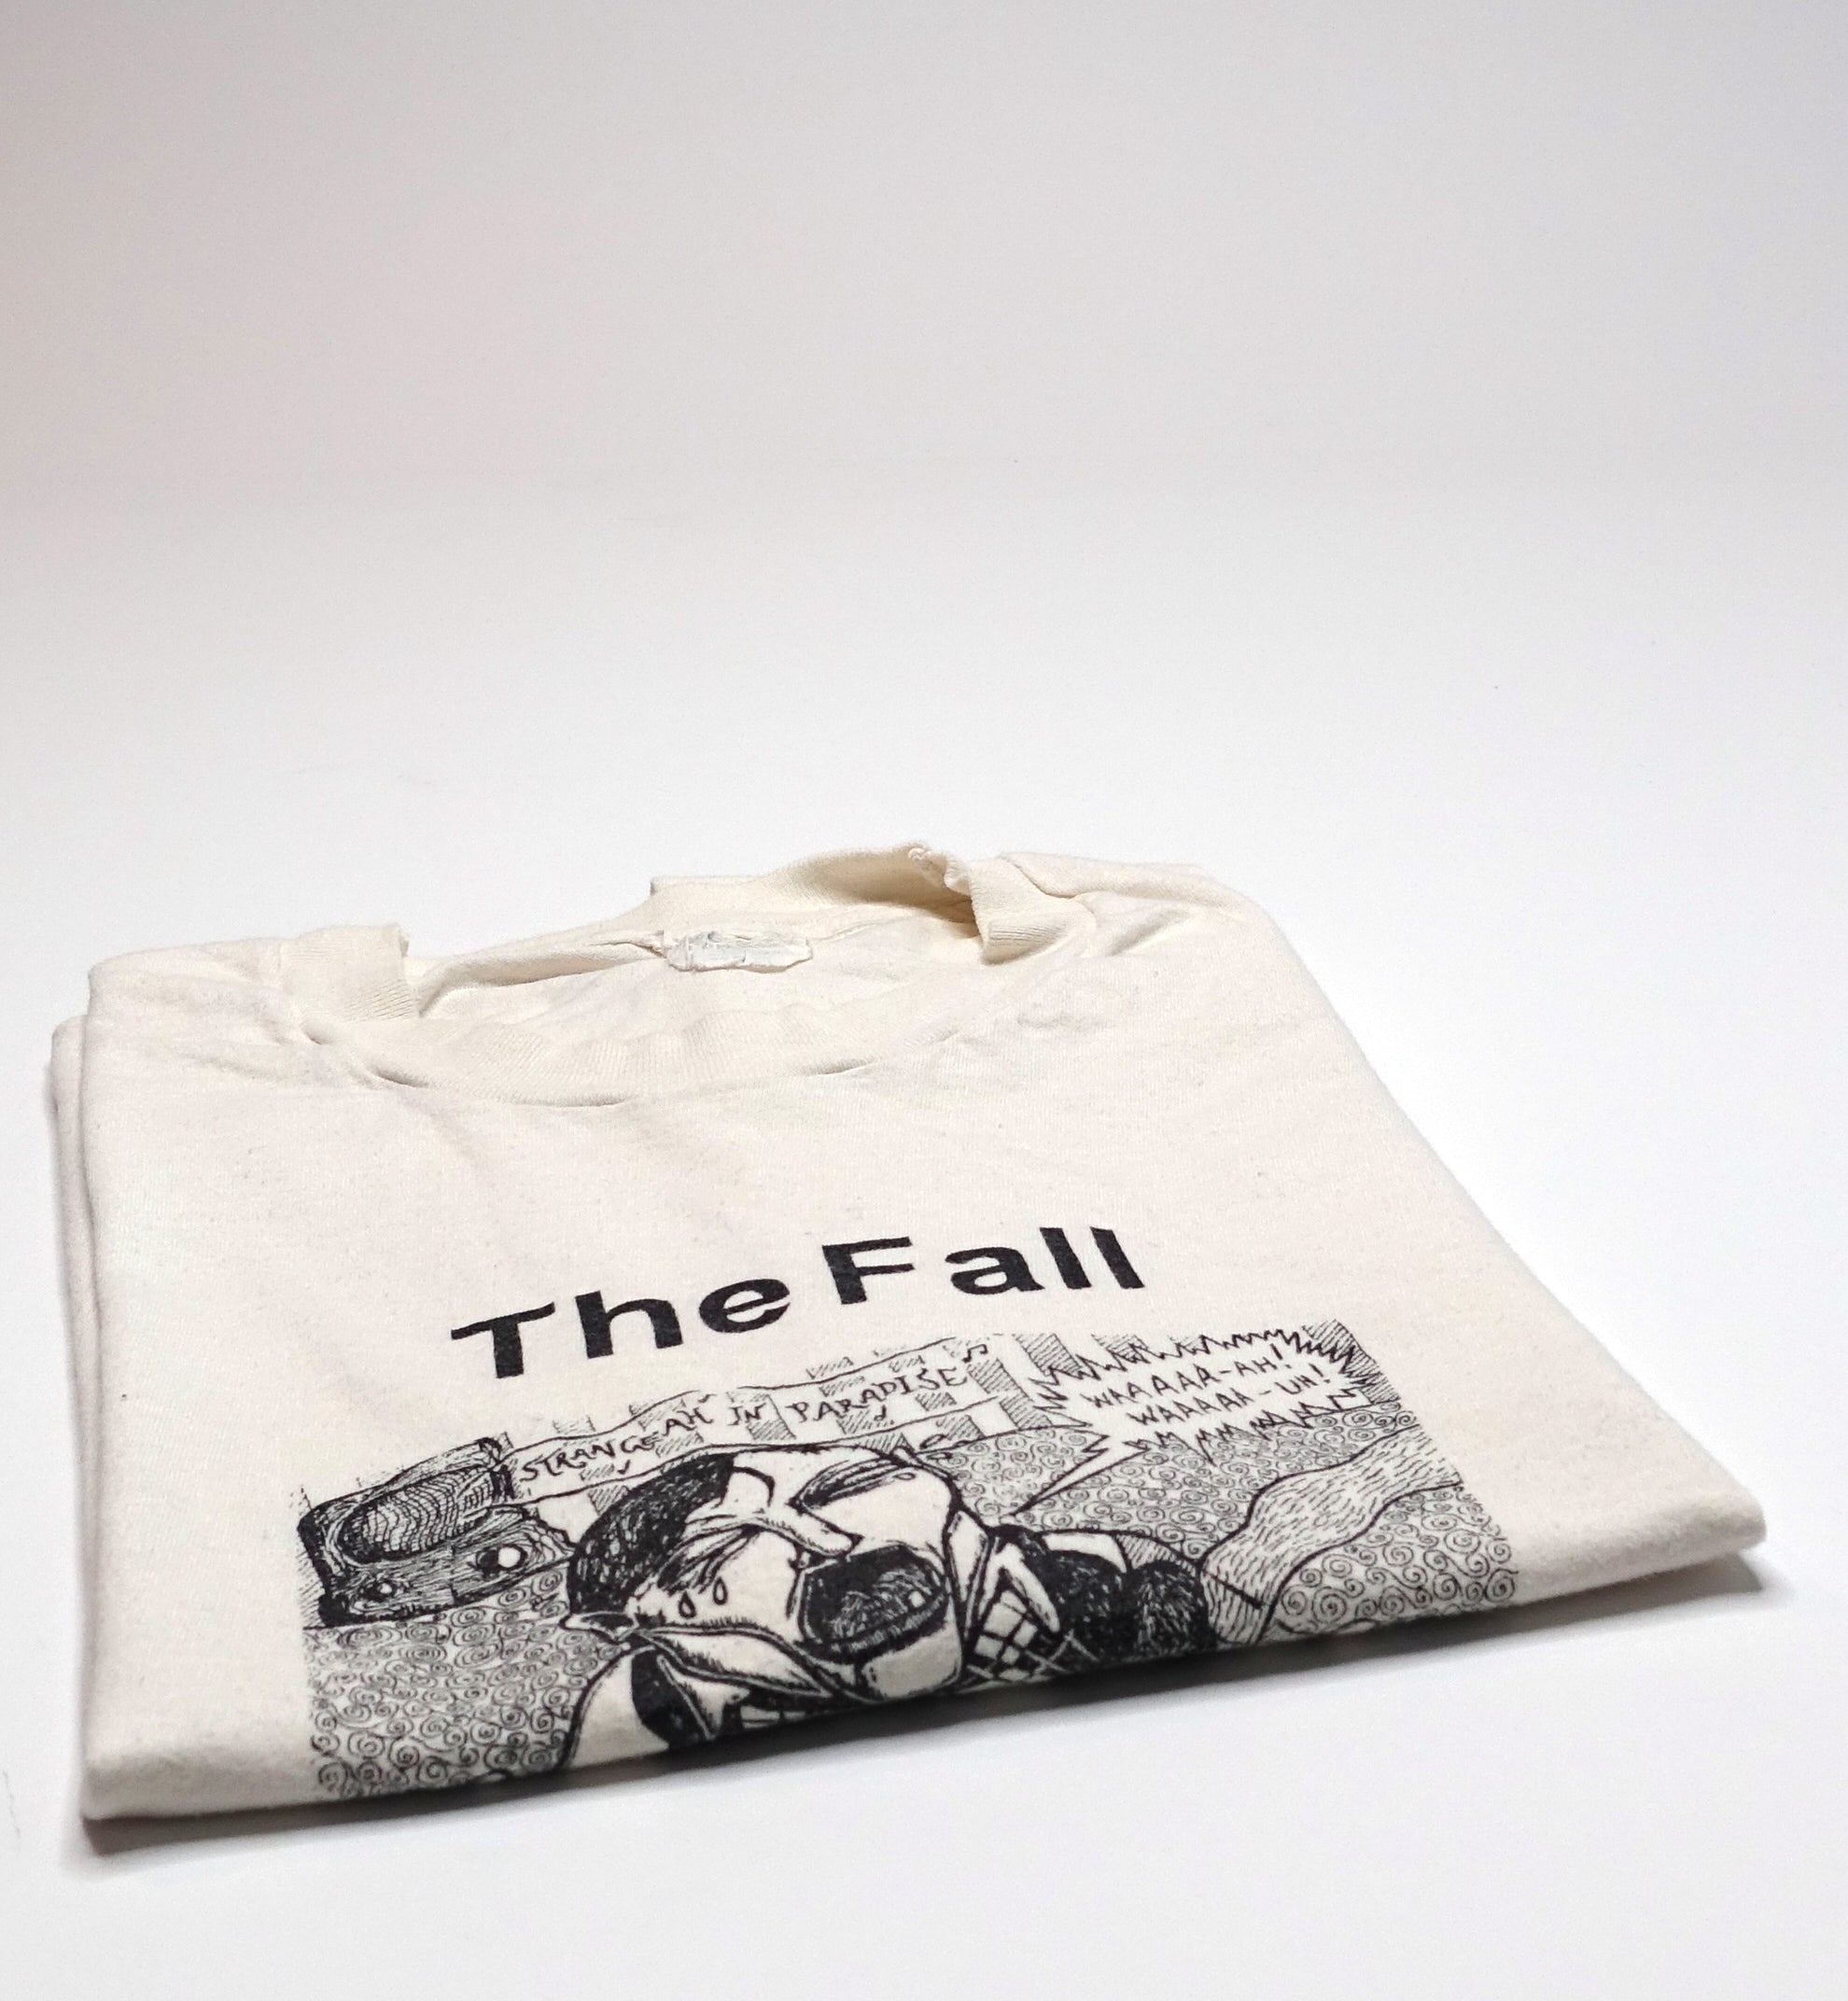 the Fall - Present Day Proletariat Tour Shirt Size Large